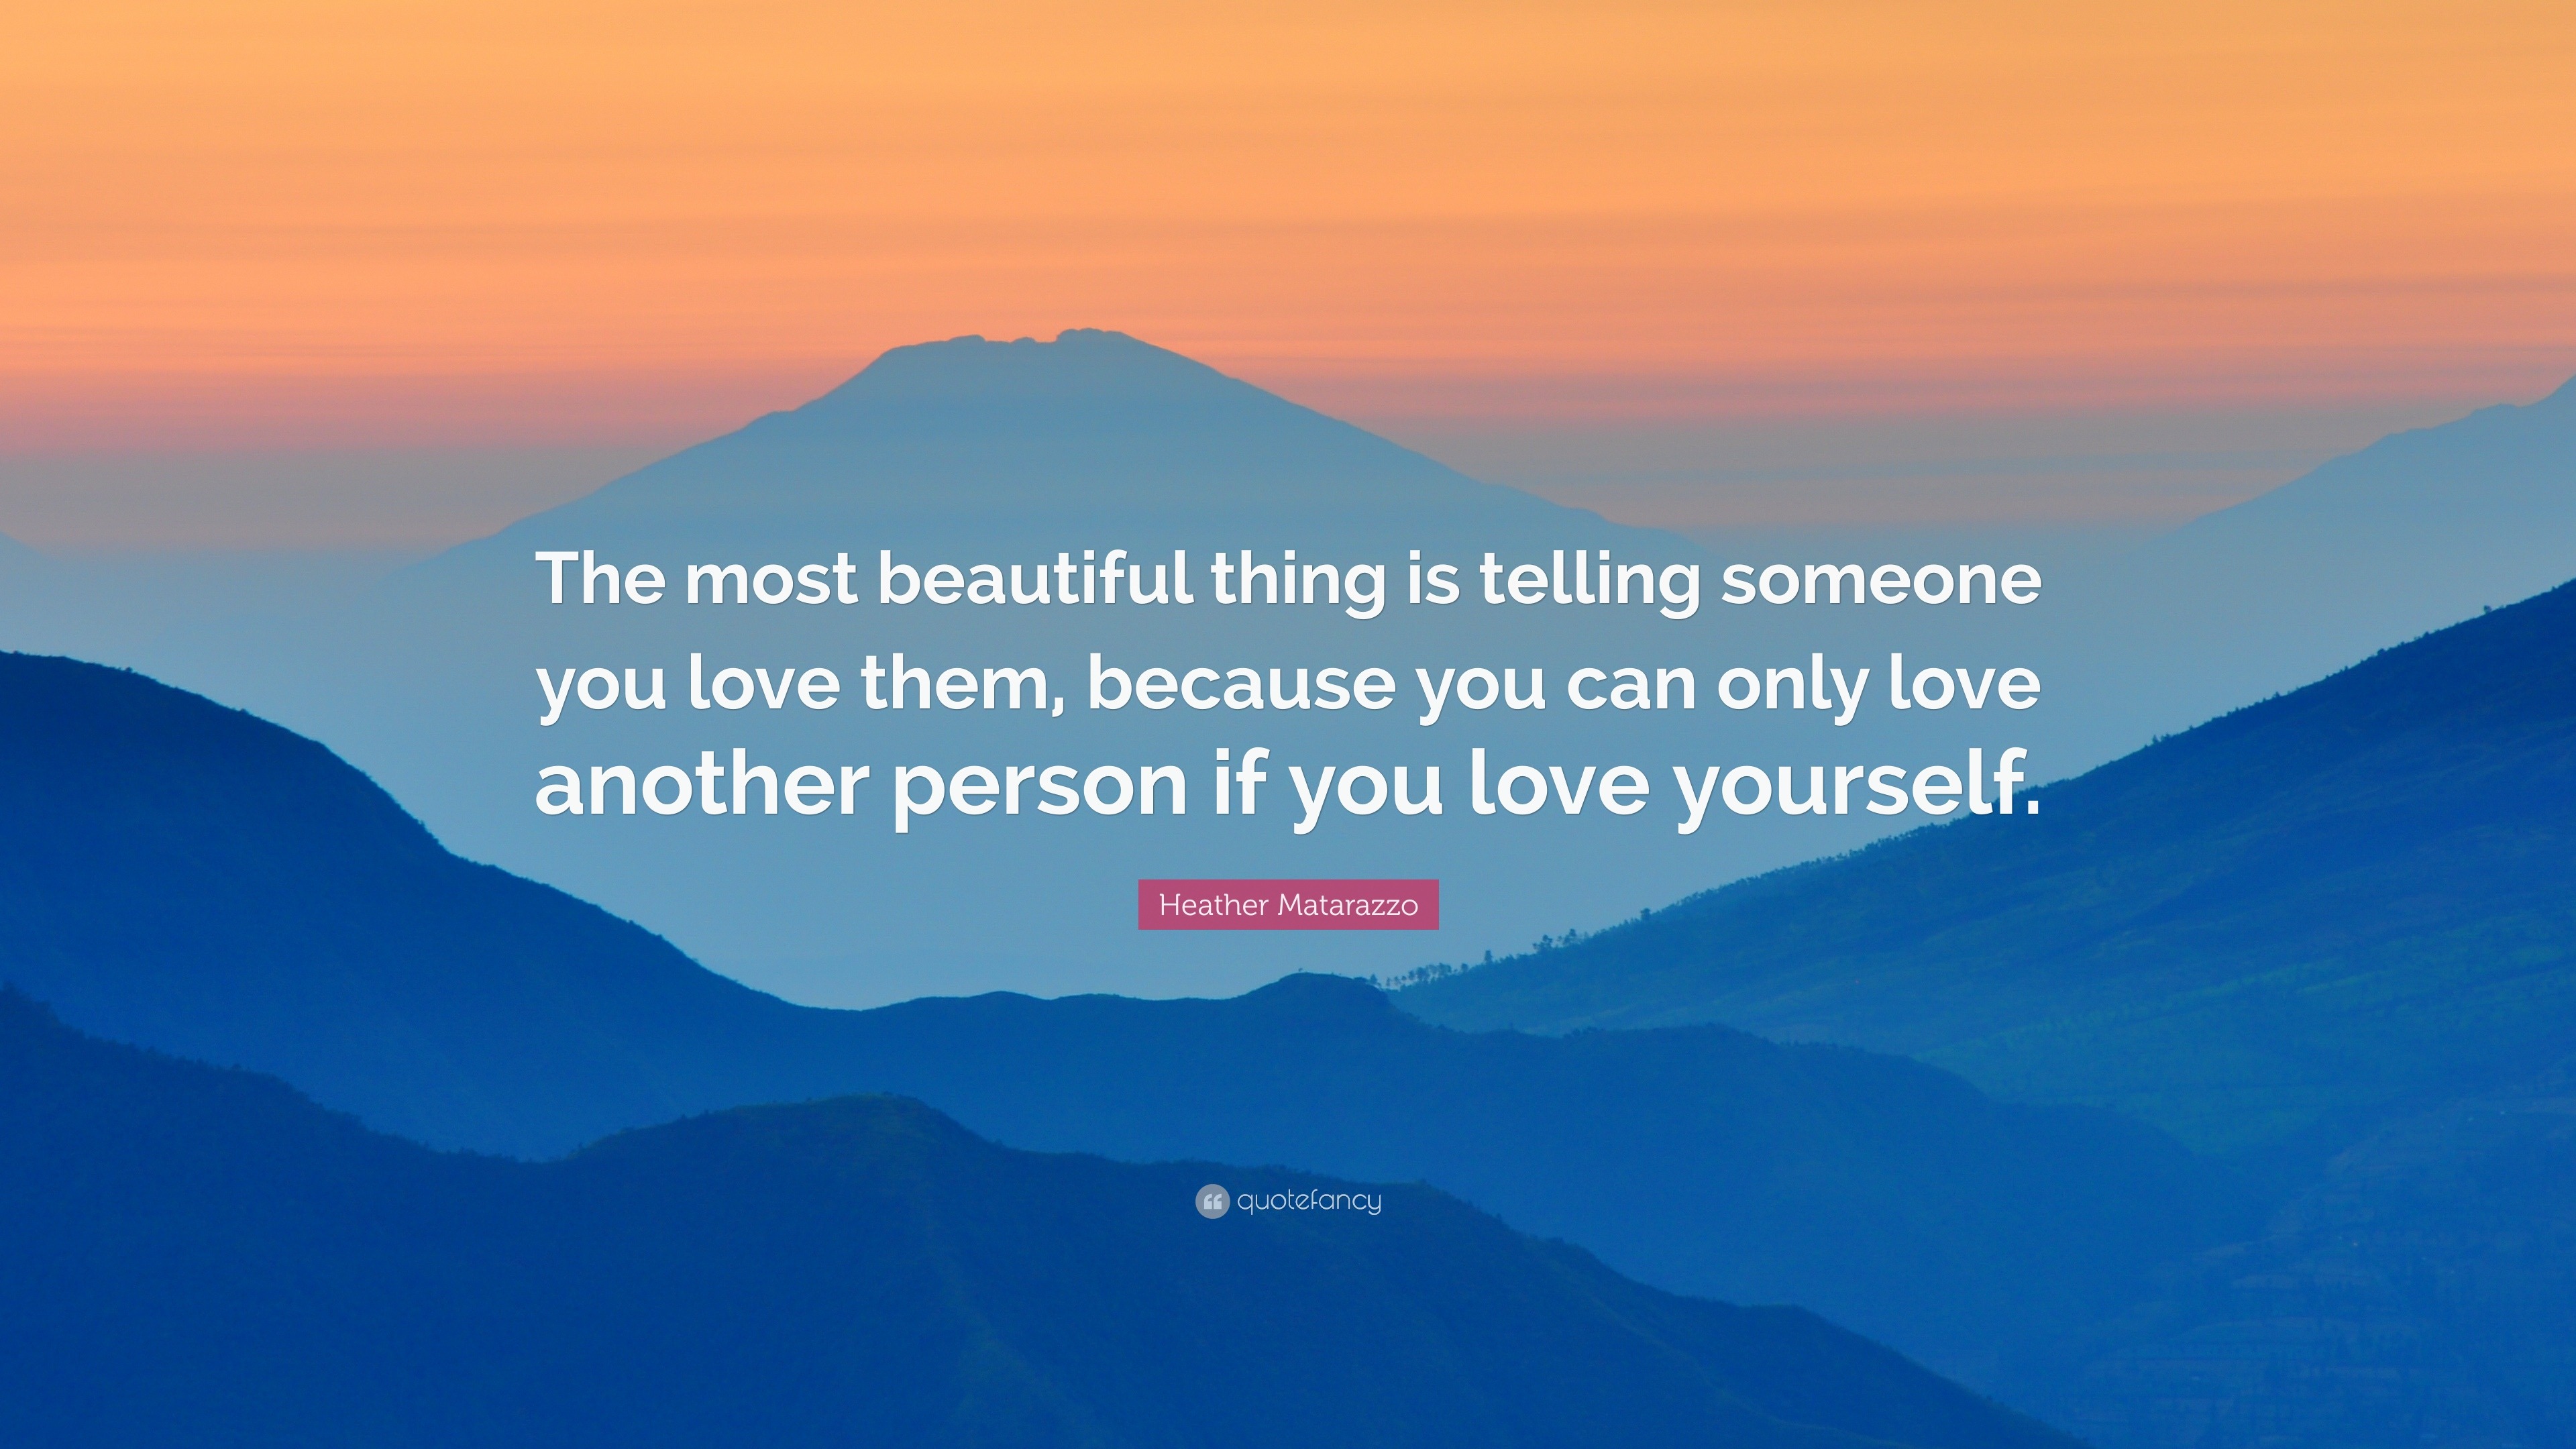 Heather Matarazzo Quote “The most beautiful thing is telling someone you love them